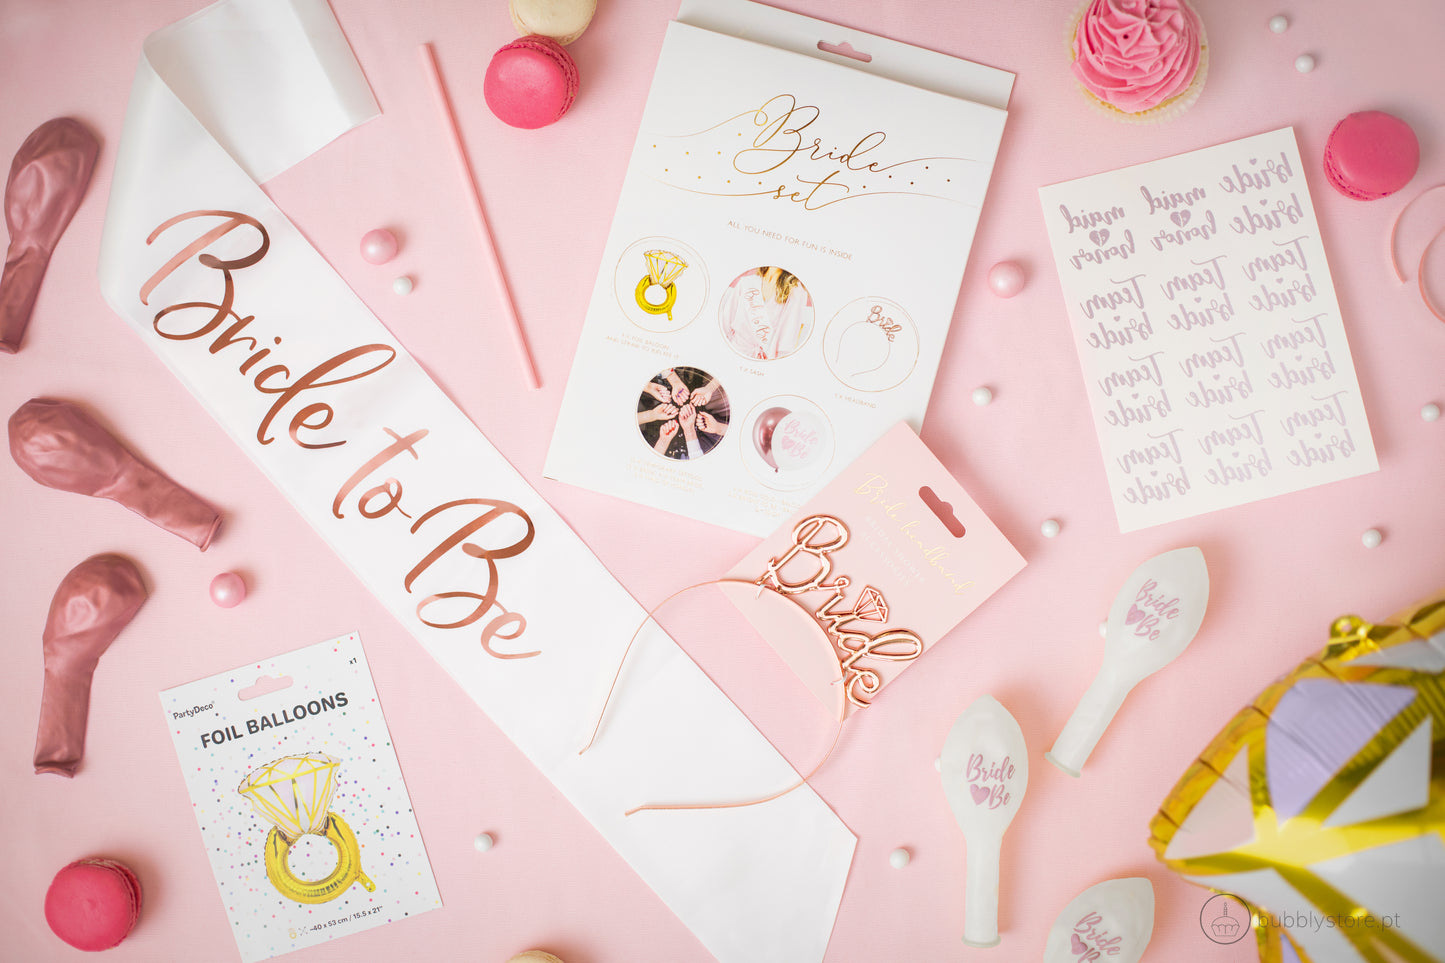 Kit Bride to Be